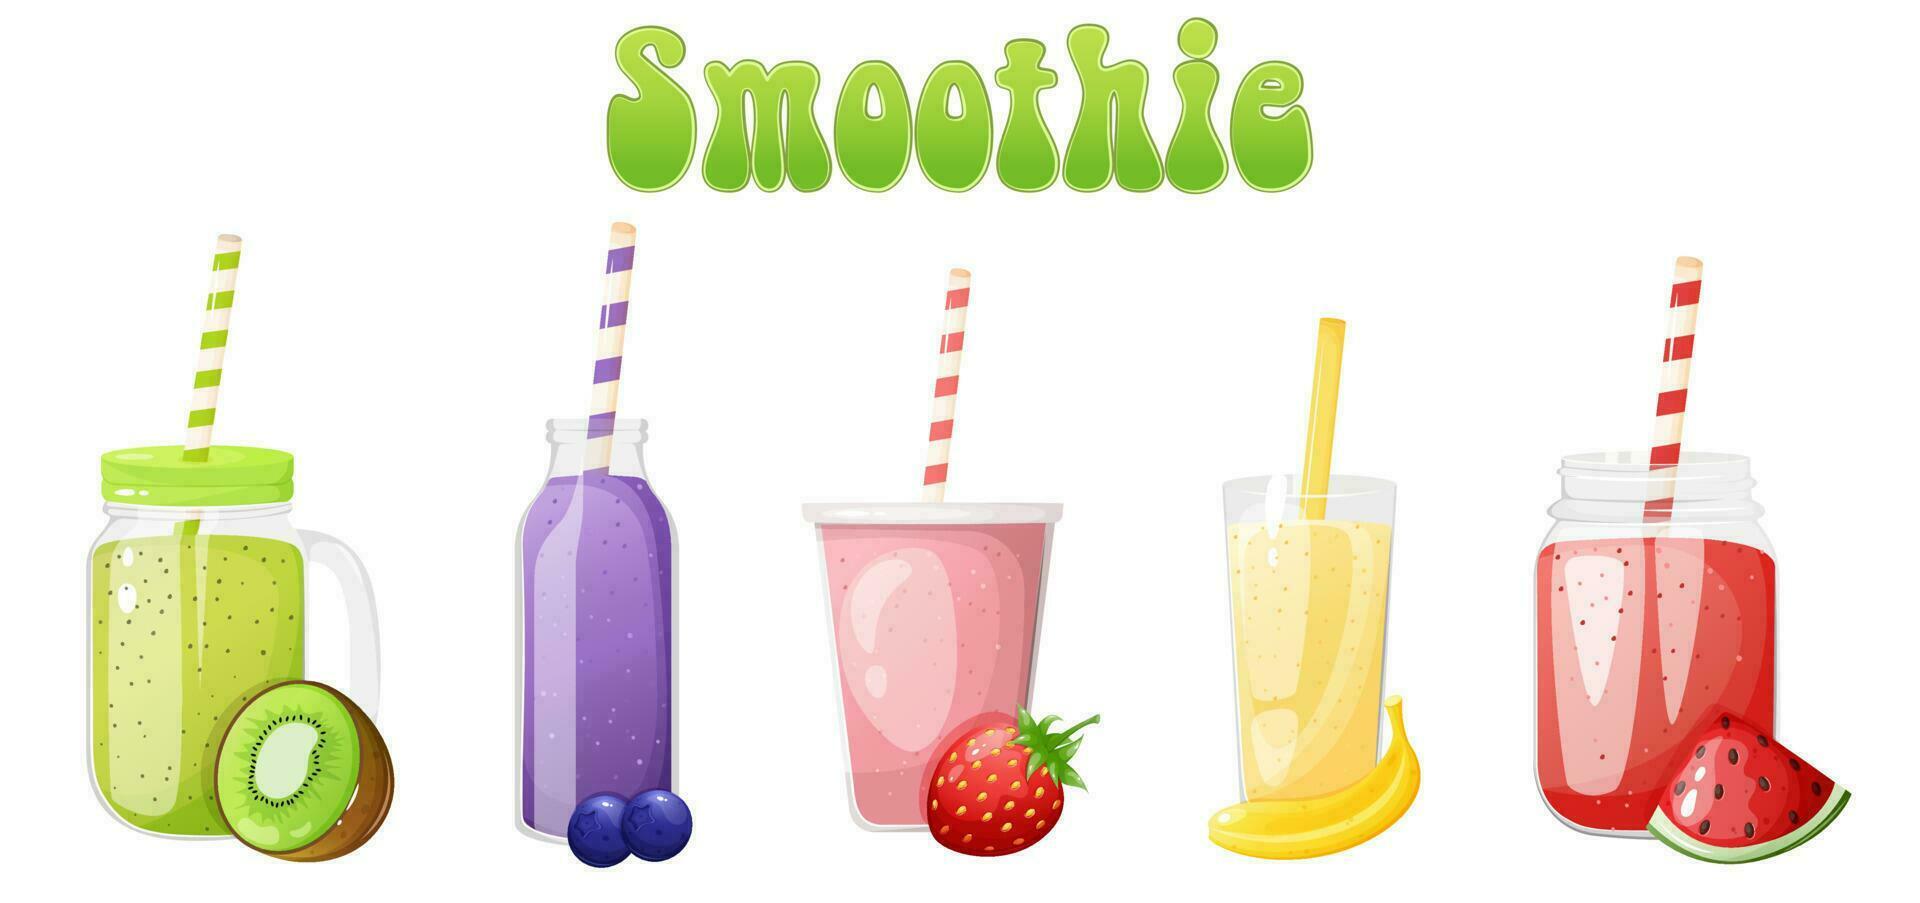 Fruits and berries smoothies set in different containers. Healthy drinks cartoon illustration. vector